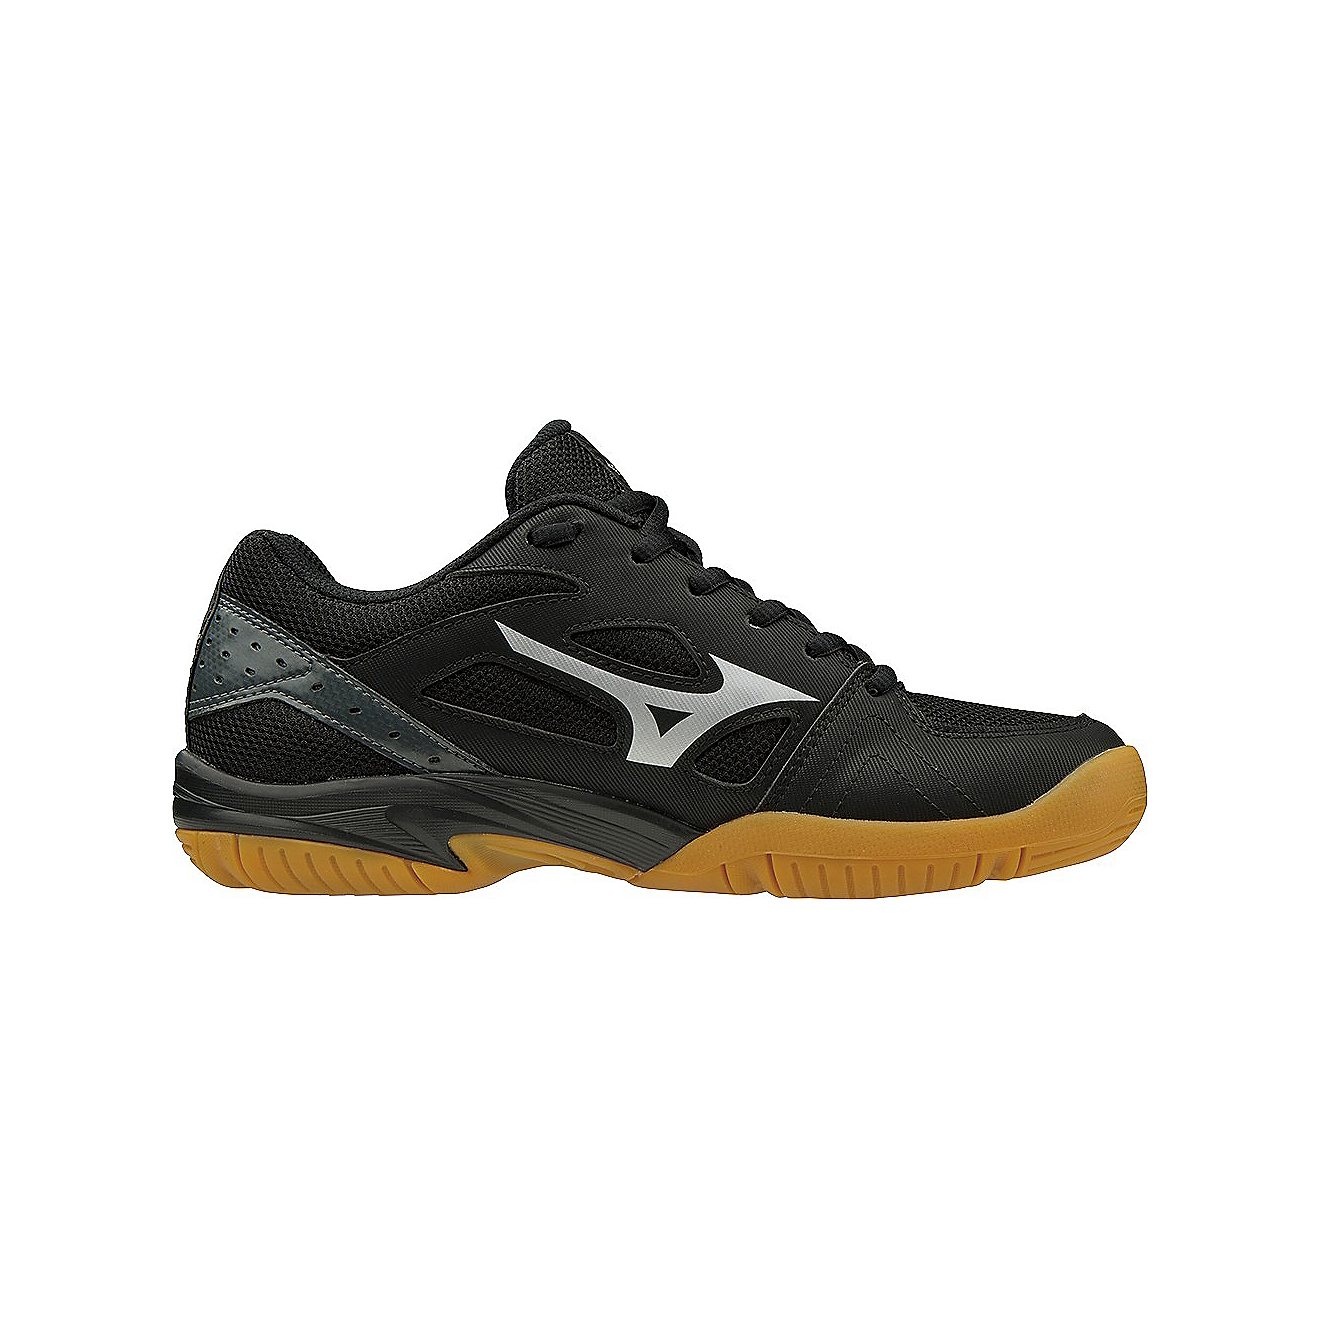 23cm Details about   MIZUNO Women's Volleyball Shoes CYCLONE SPEED 2 MID Black V1GC1985 US6.5 